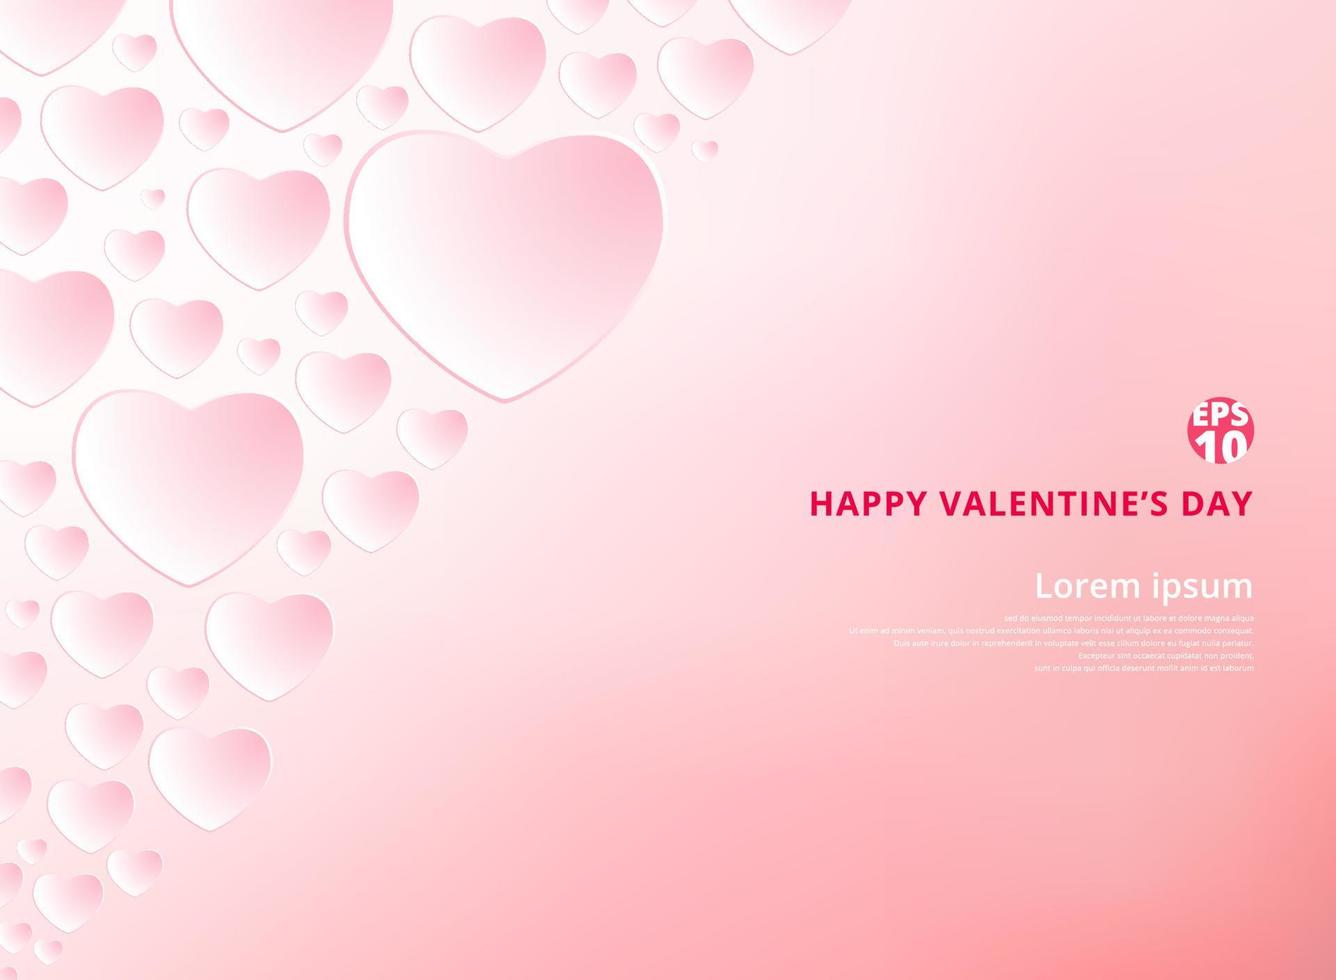 Happy Valentine's day card with hearts pink on light pink background vector